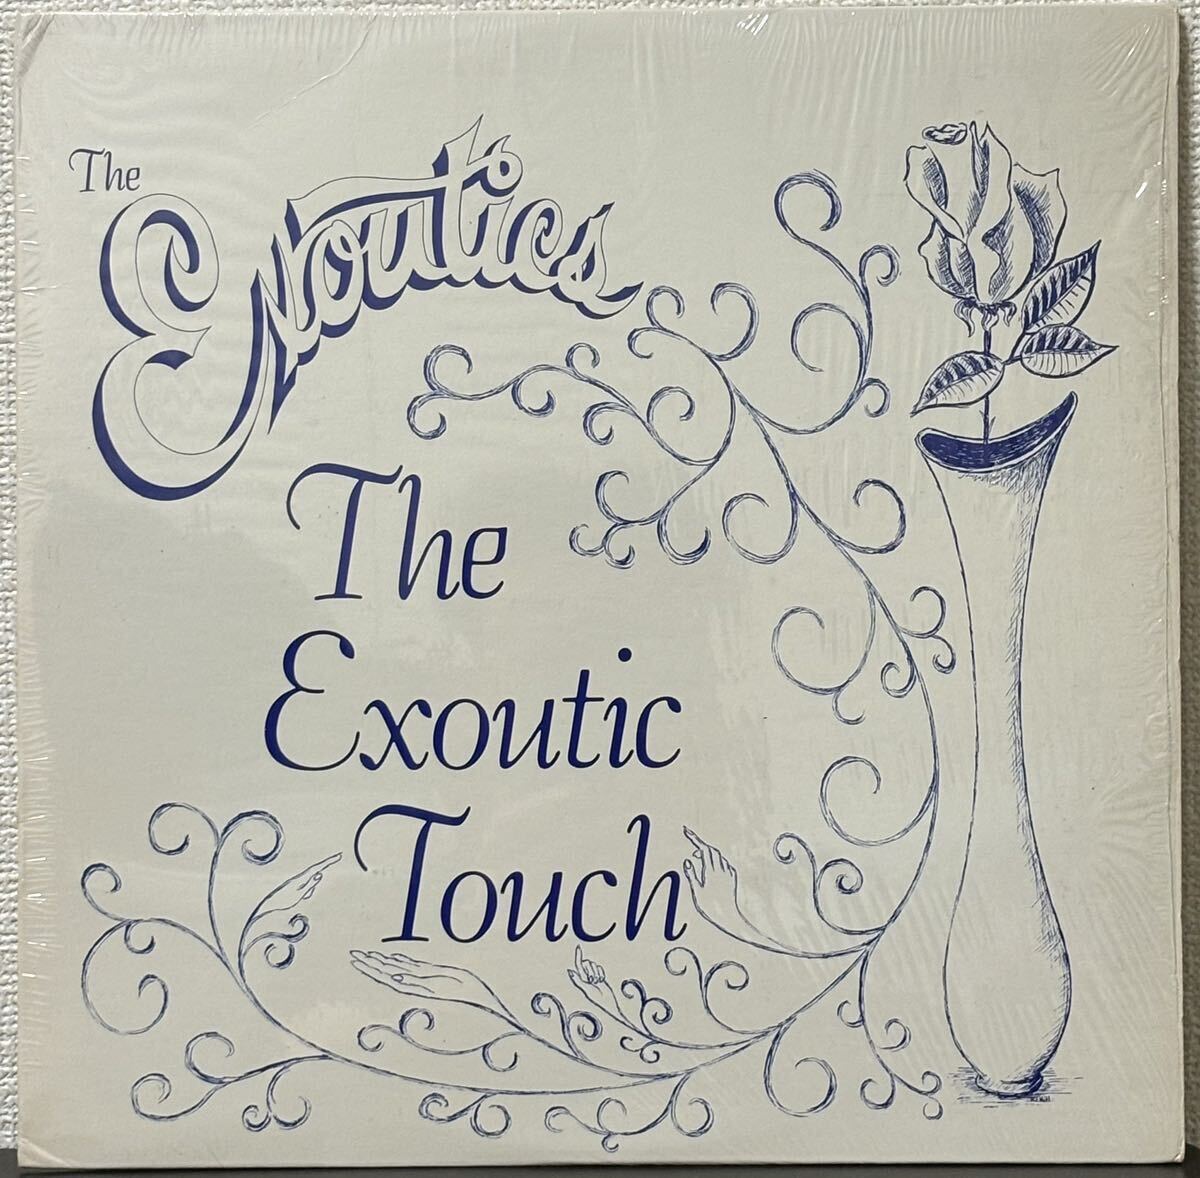 The Exoutics / The Exoutic Touch レア soul シュリンク付き 美盤_画像1